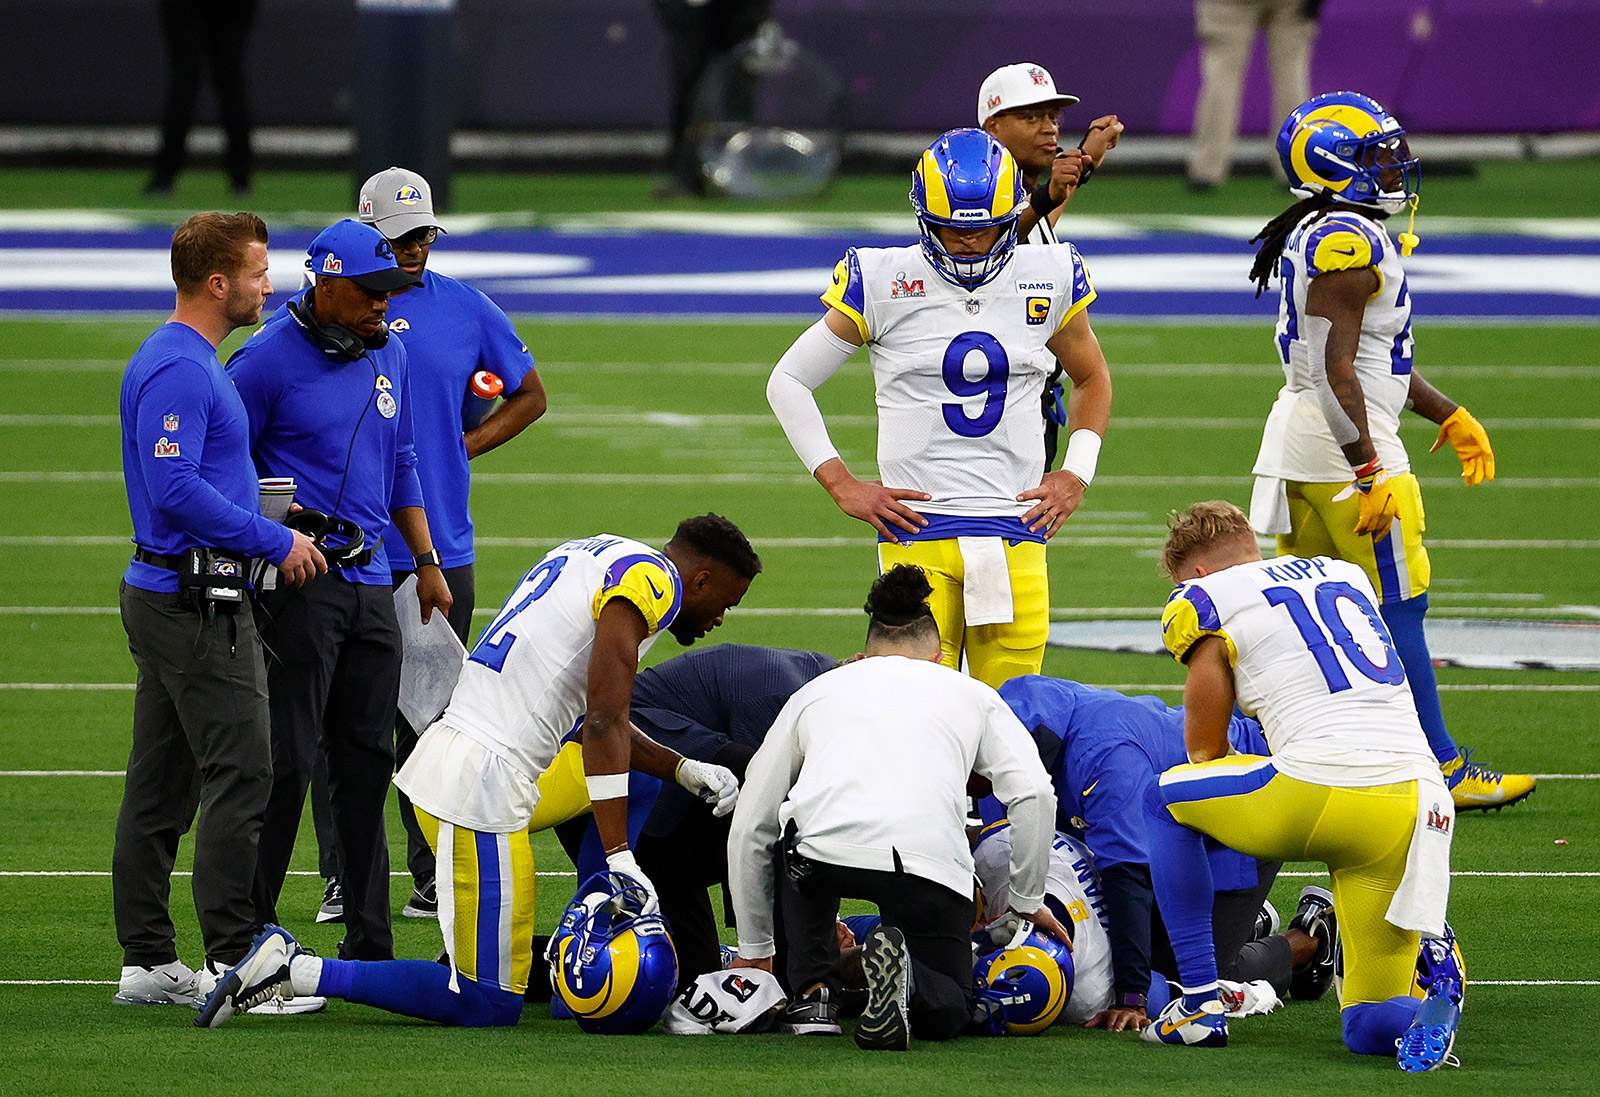 Los Angeles Rams wide receiver Odell Beckham Jr. lies on the ground after an injury in the second quarter.